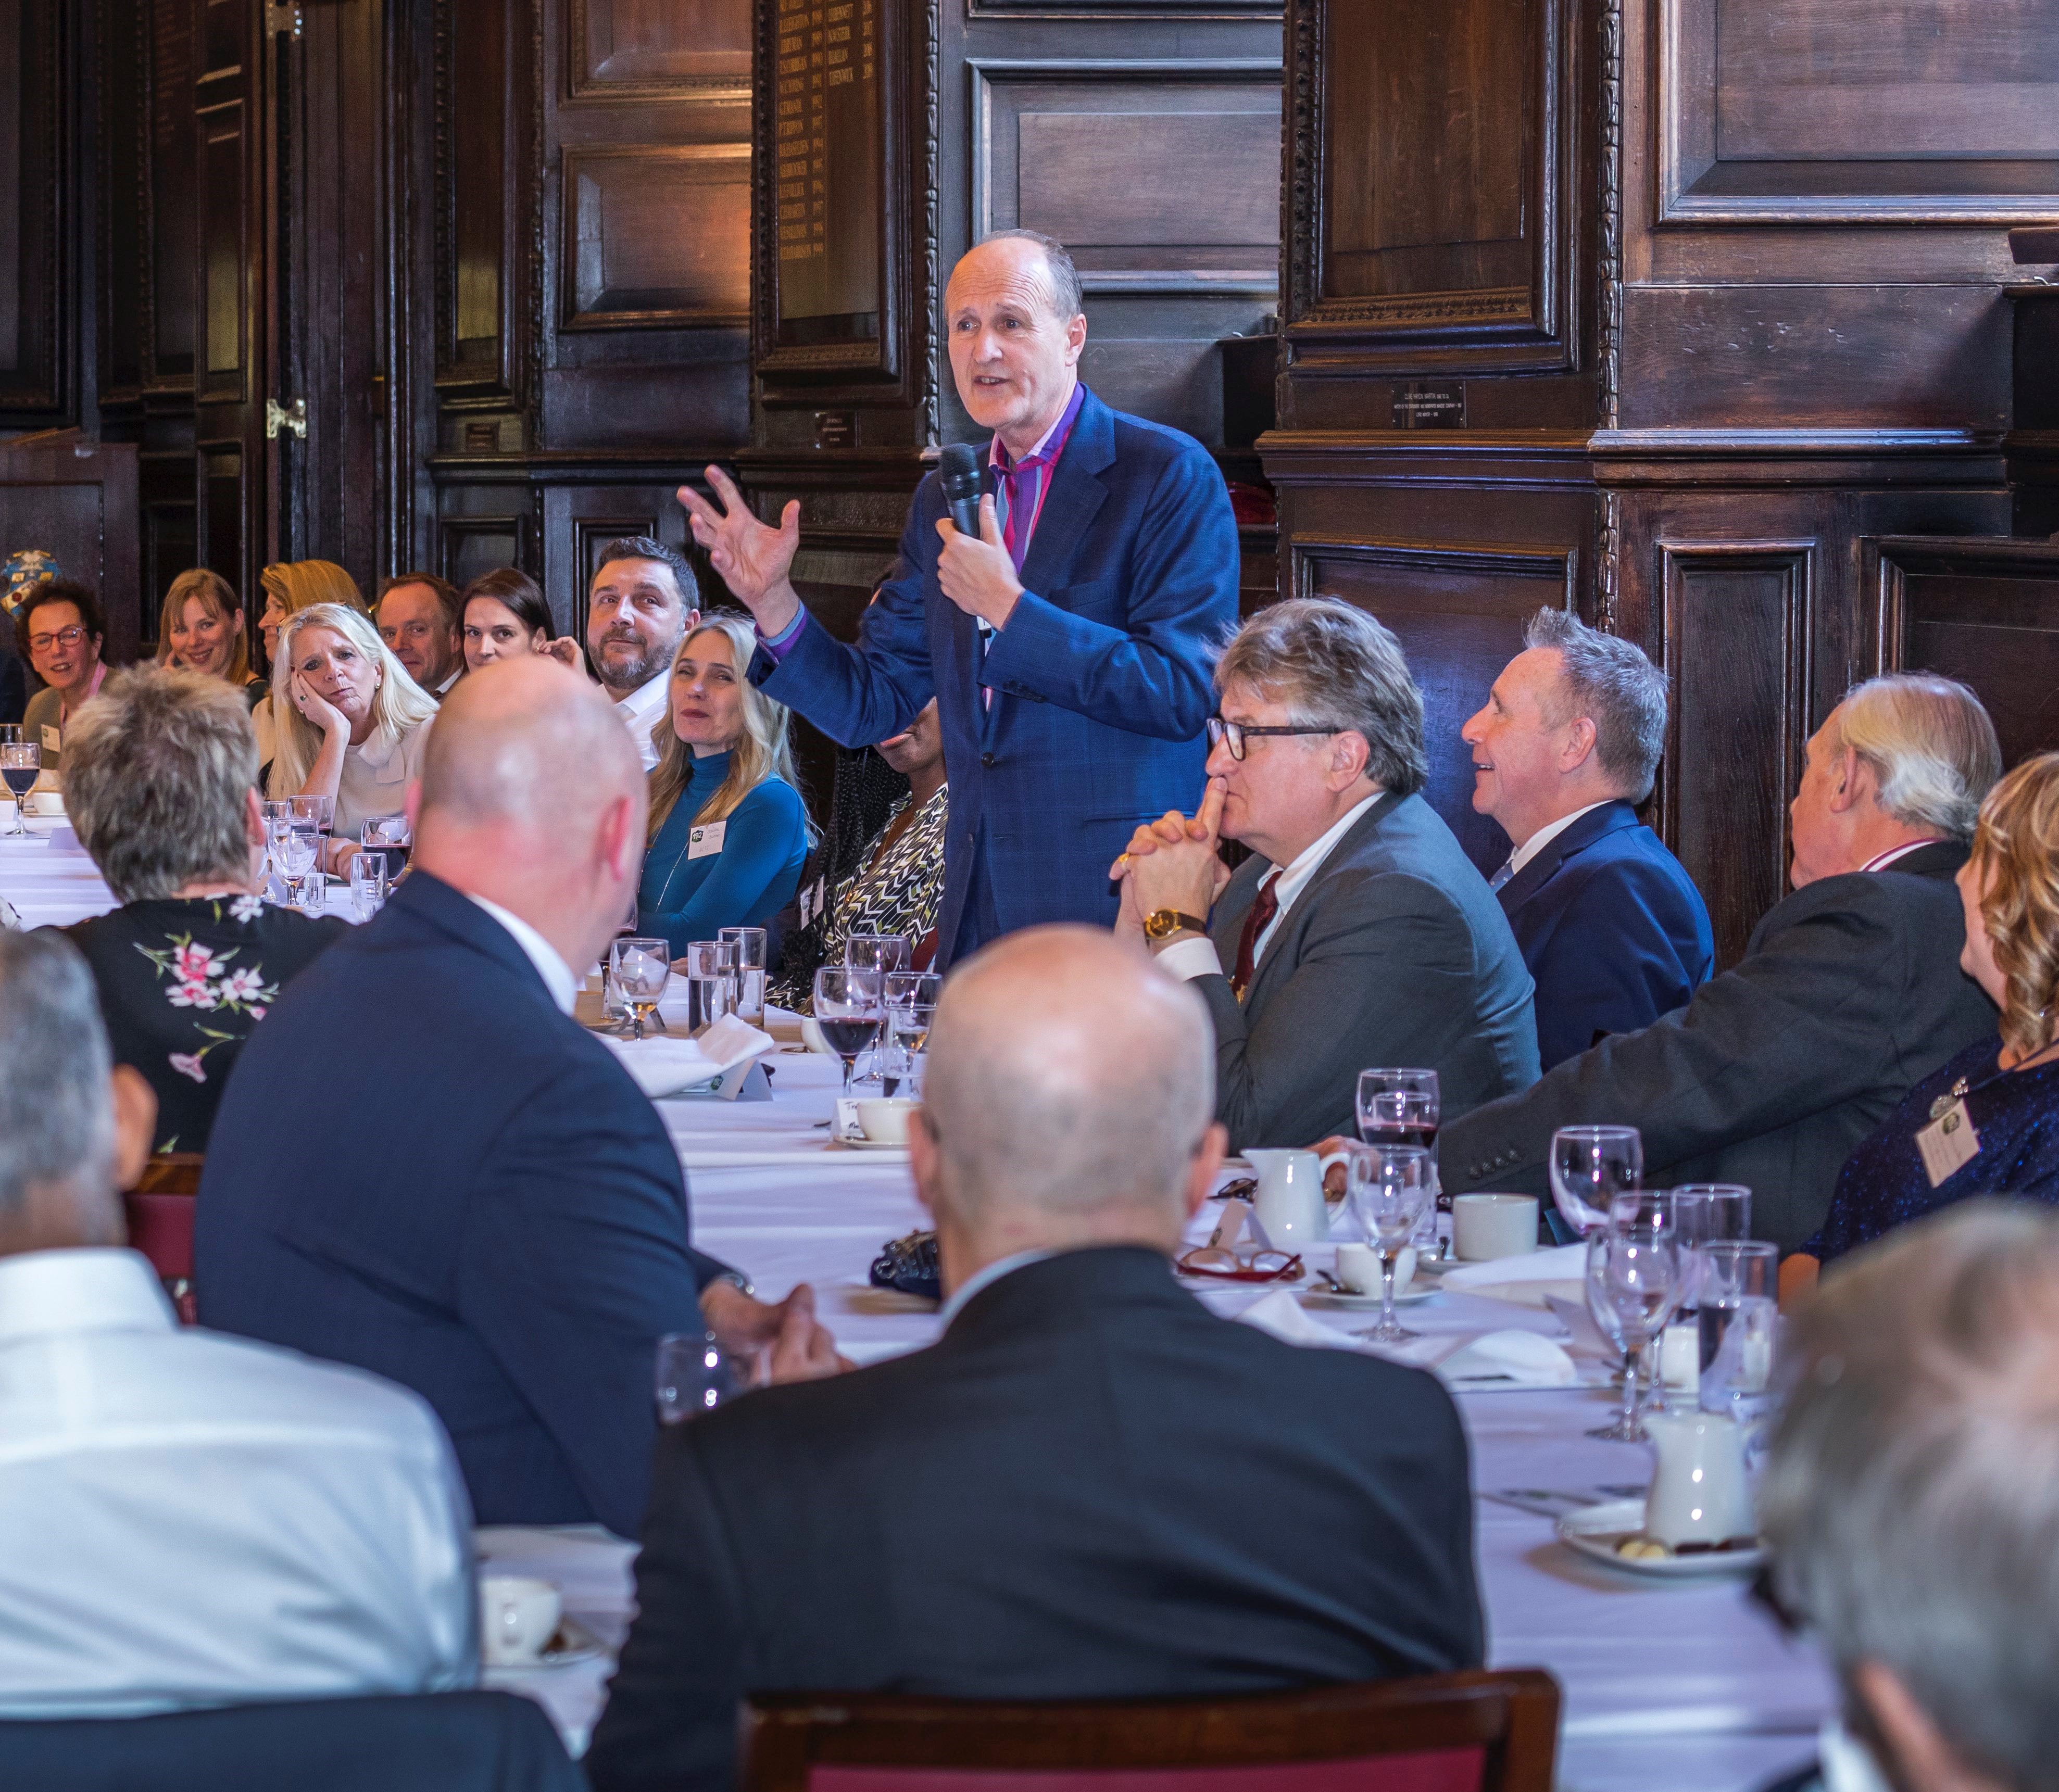 Sir Peter Bazalgette, non-executive Chair of ITV, entertains guests at The Printing Charity’s 192nd Annual Luncheon